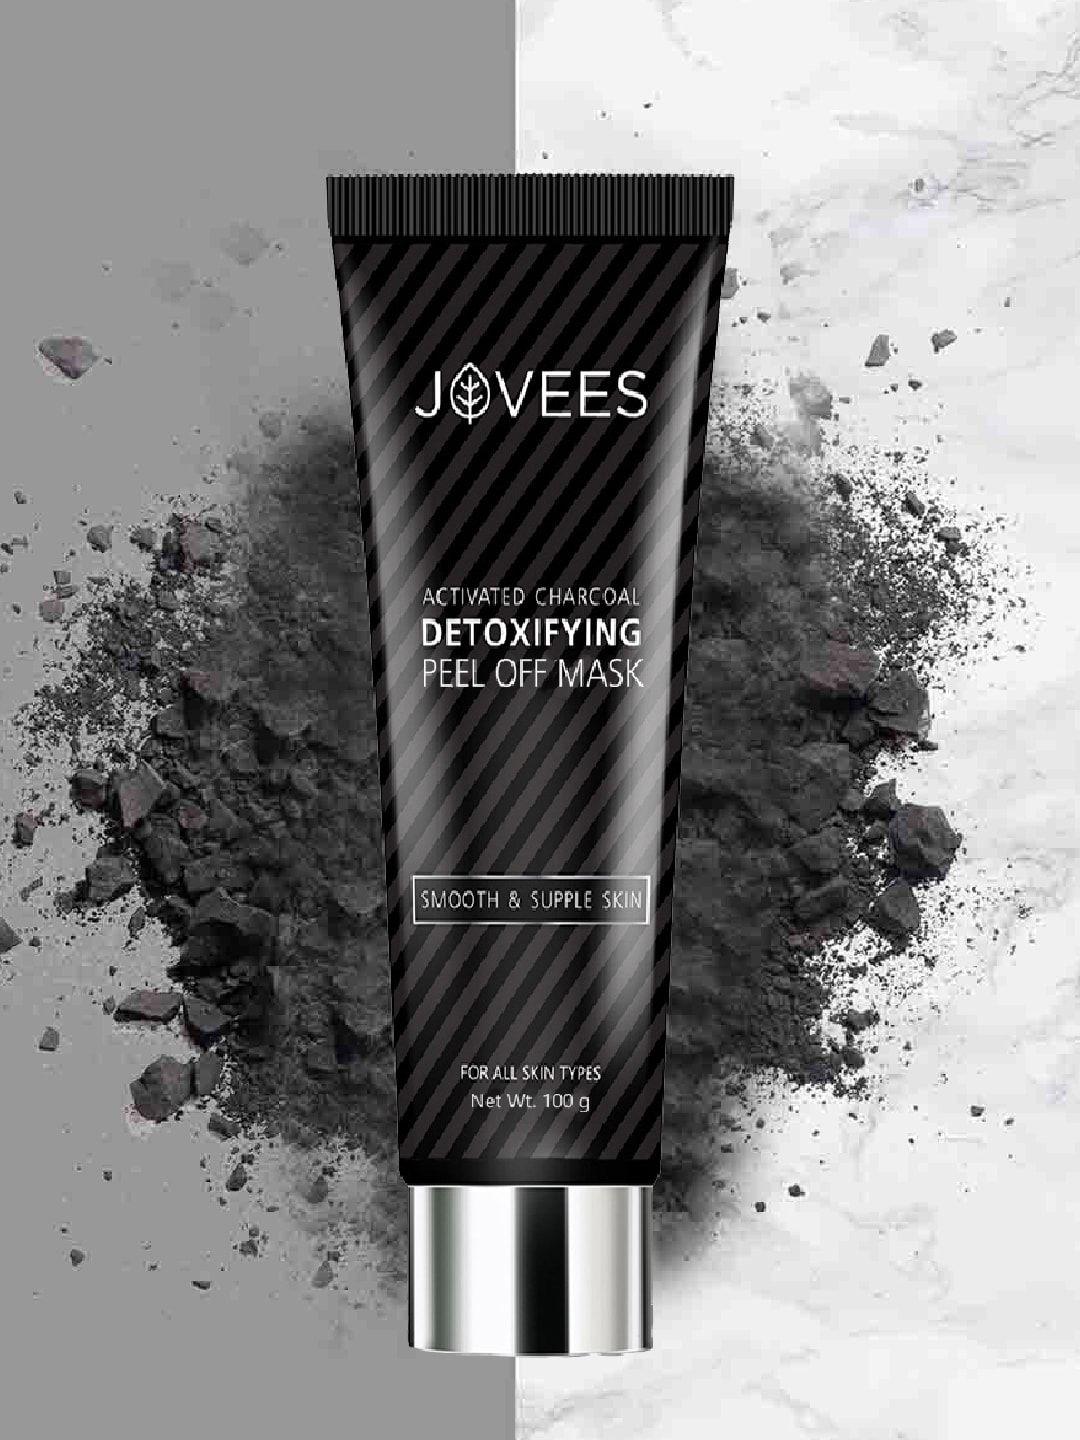 jovees activated charcoal detoxifying peel off mask for smooth & supple skin - 100 g